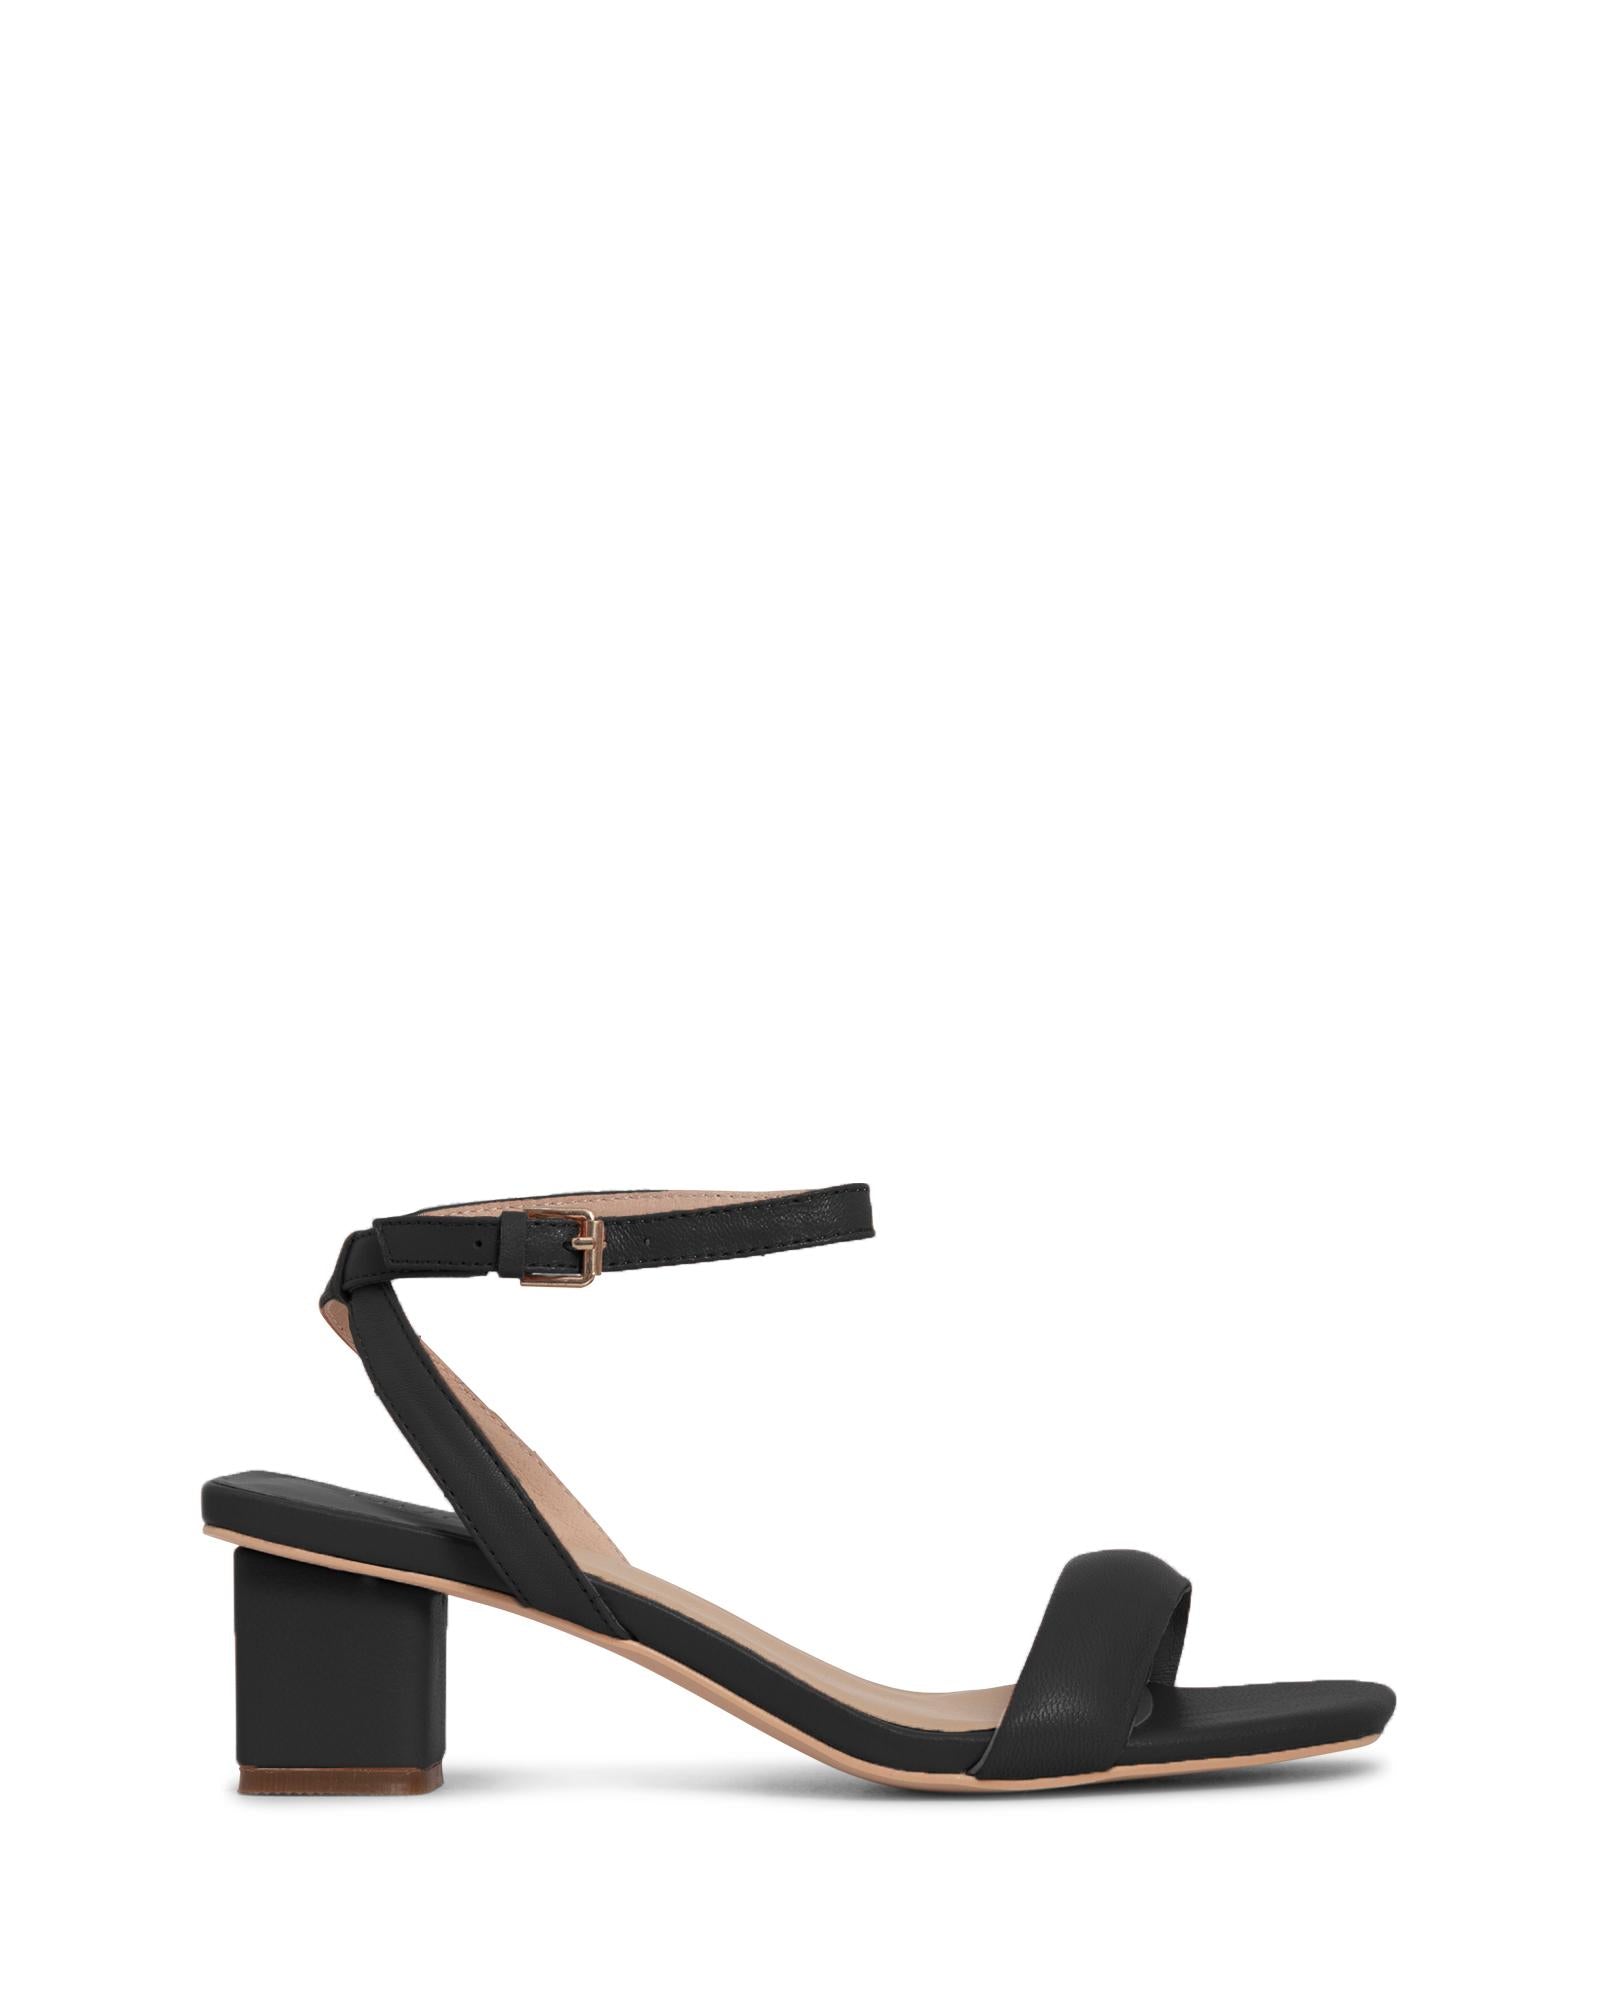 Harlyn Black 5cm Low Block Heel with Square Toe and Adjustable Ankle Strap